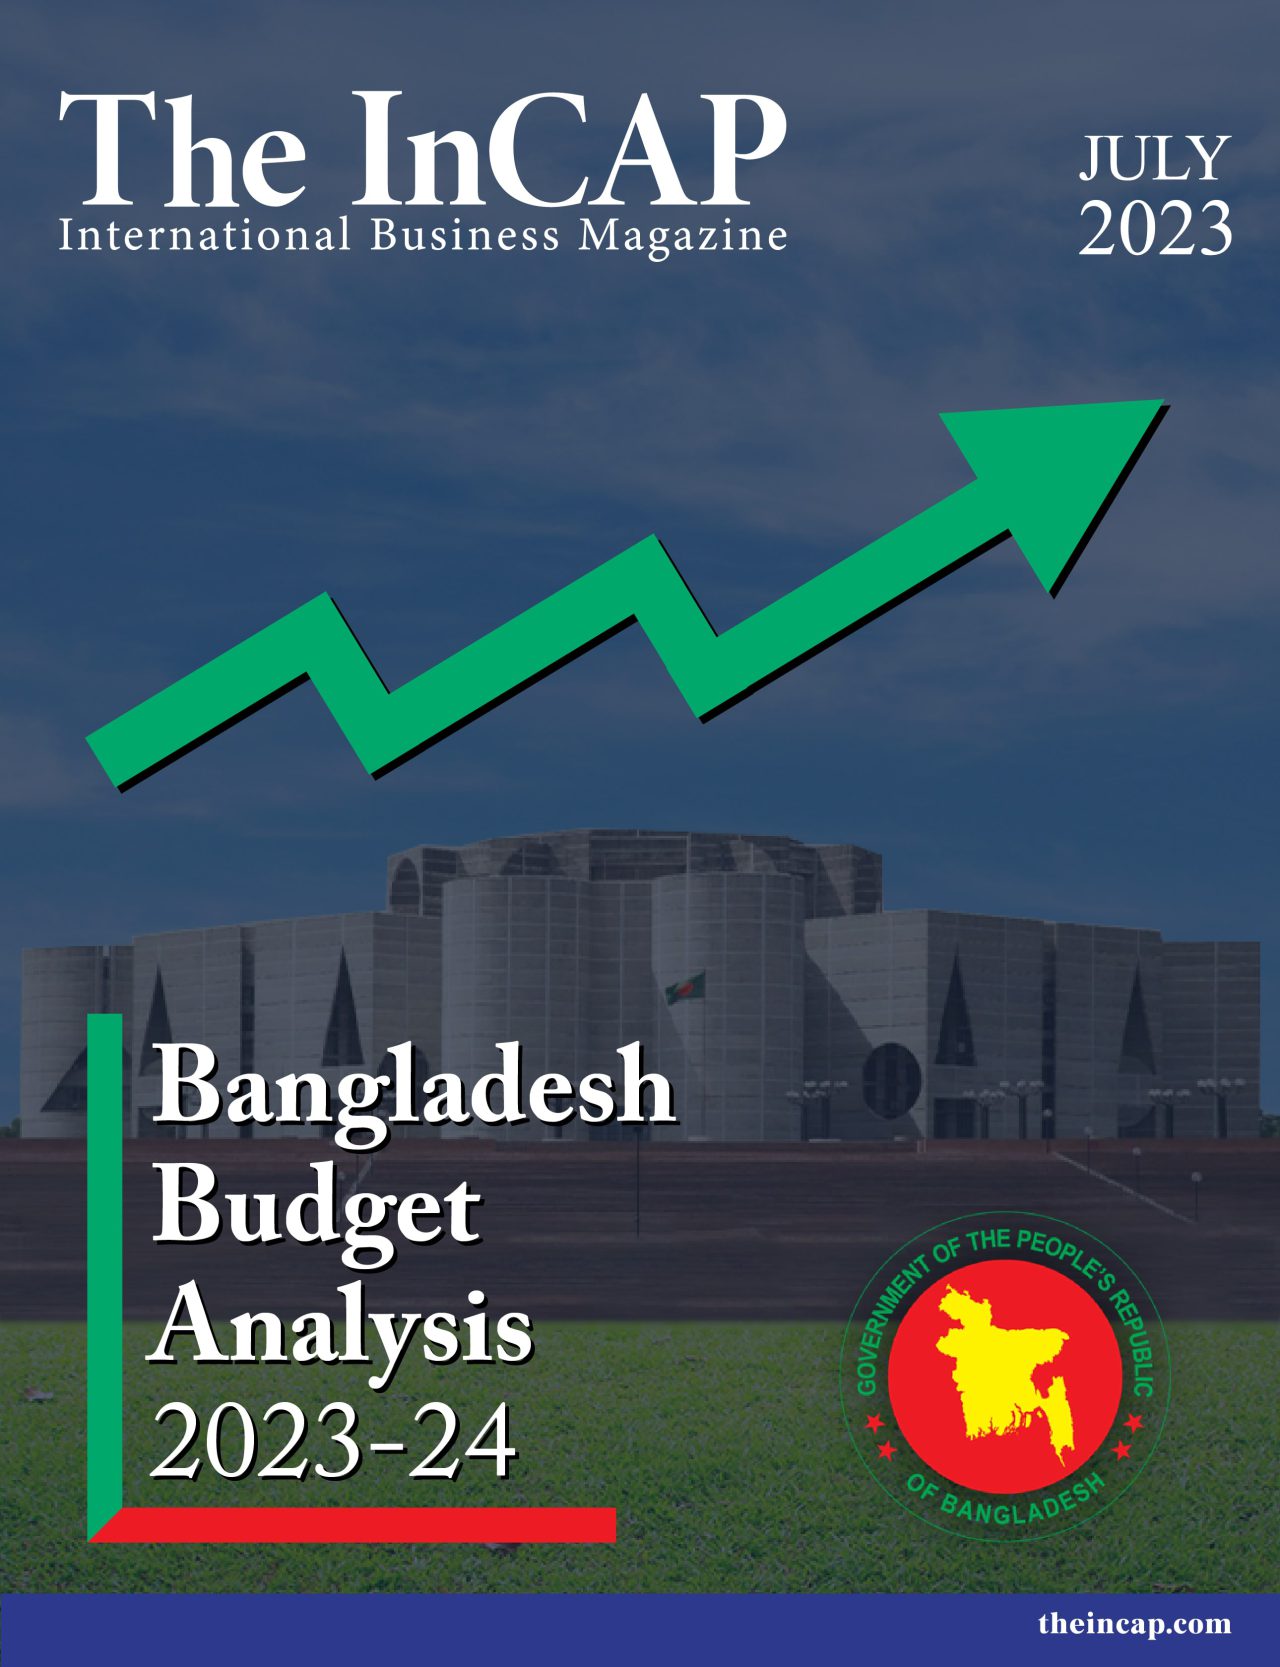 Bangladesh Budget Analysis 202324 July 2023 Issue of The InCAP Now